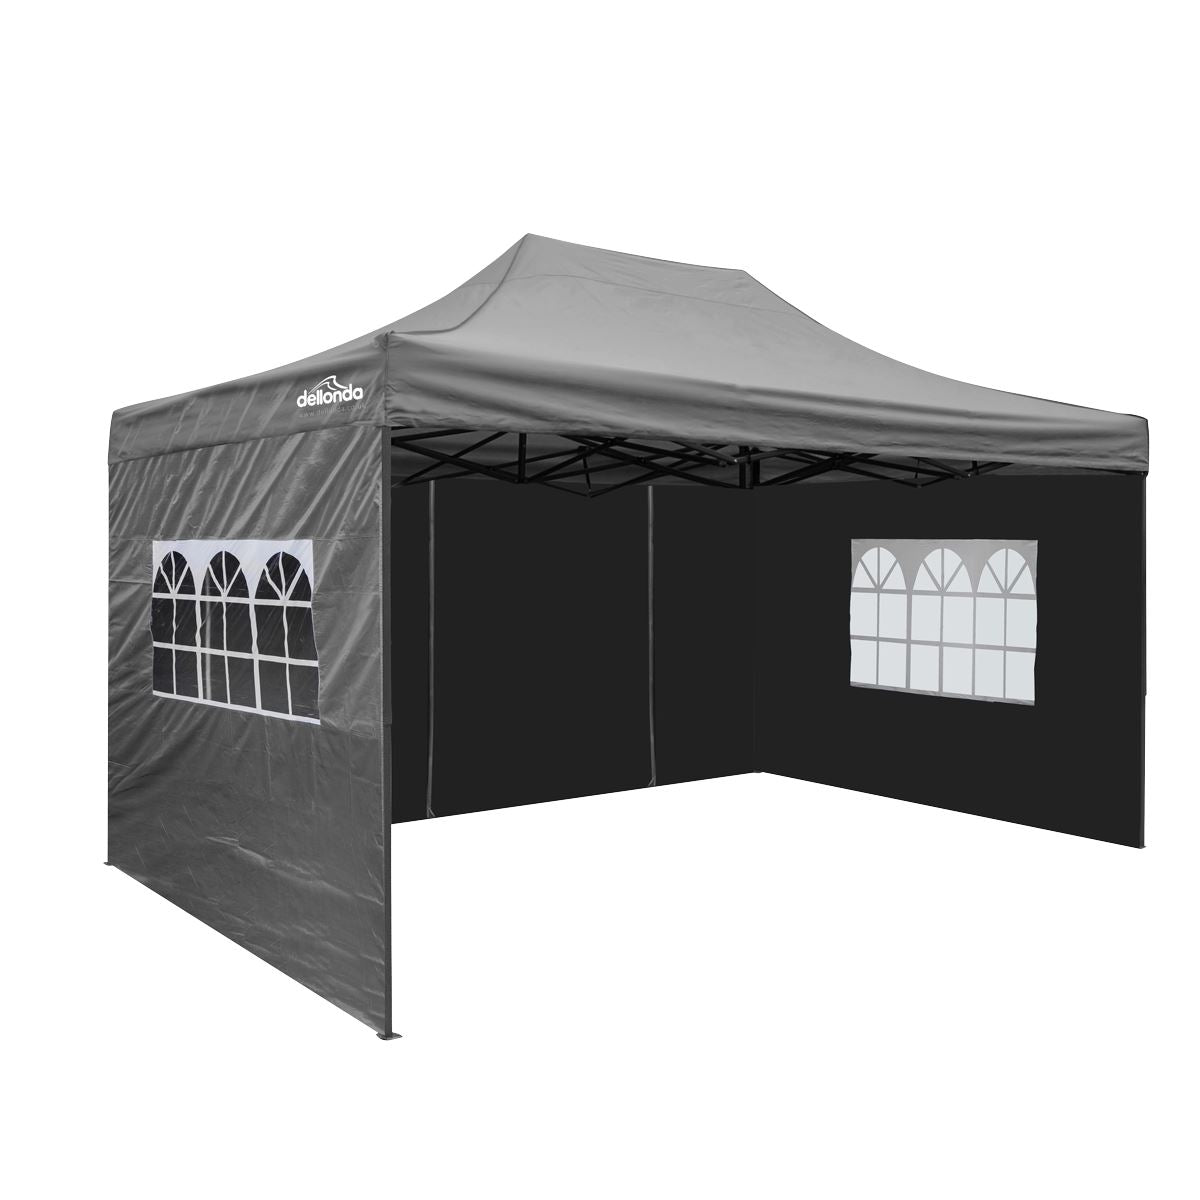 Dellonda Premium 3x4.5m Pop-Up Gazebo & Side Walls, PVC Coated, Water Resistant Fabric with Carry Bag, Rope, Stakes & Weight Bags - Grey